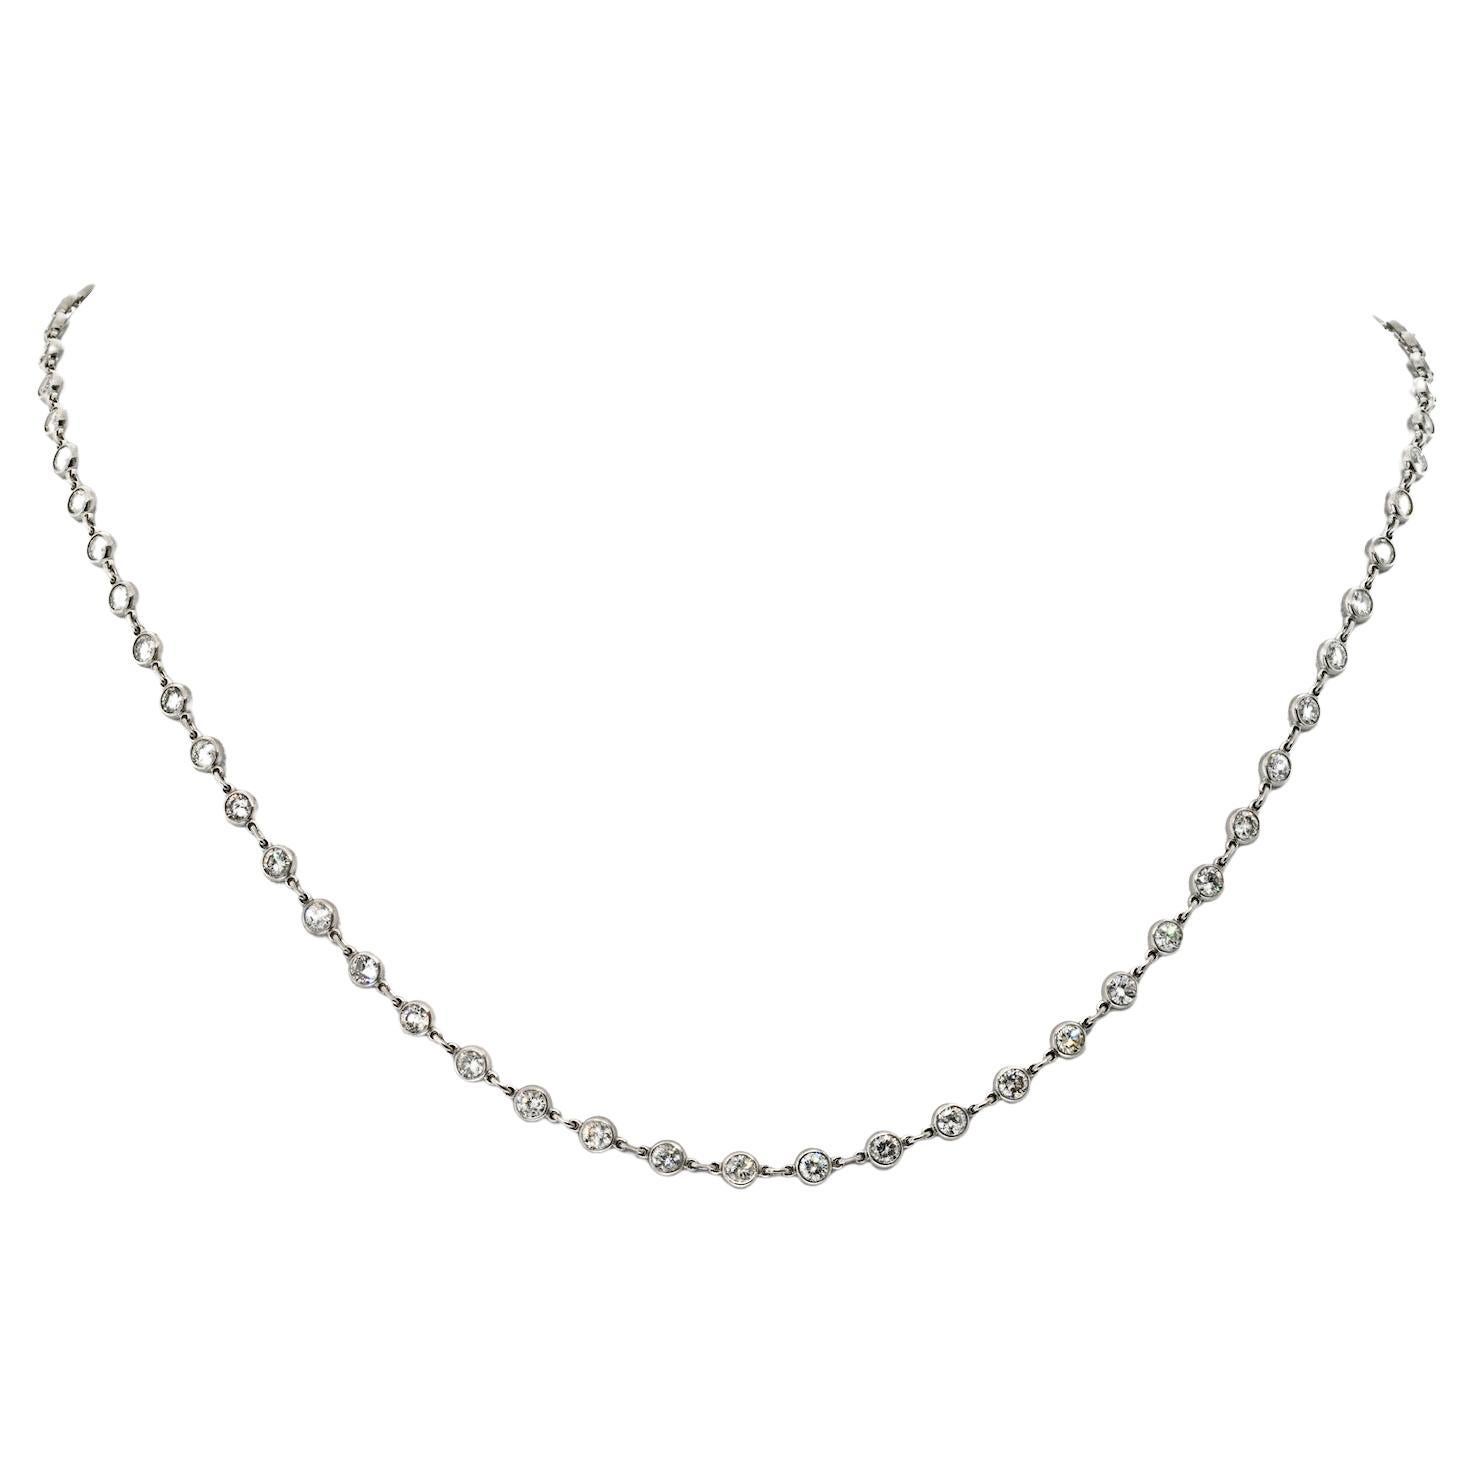 18K White Gold 6.17cttw Diamond By The Yard 16 Inch Chain Necklace